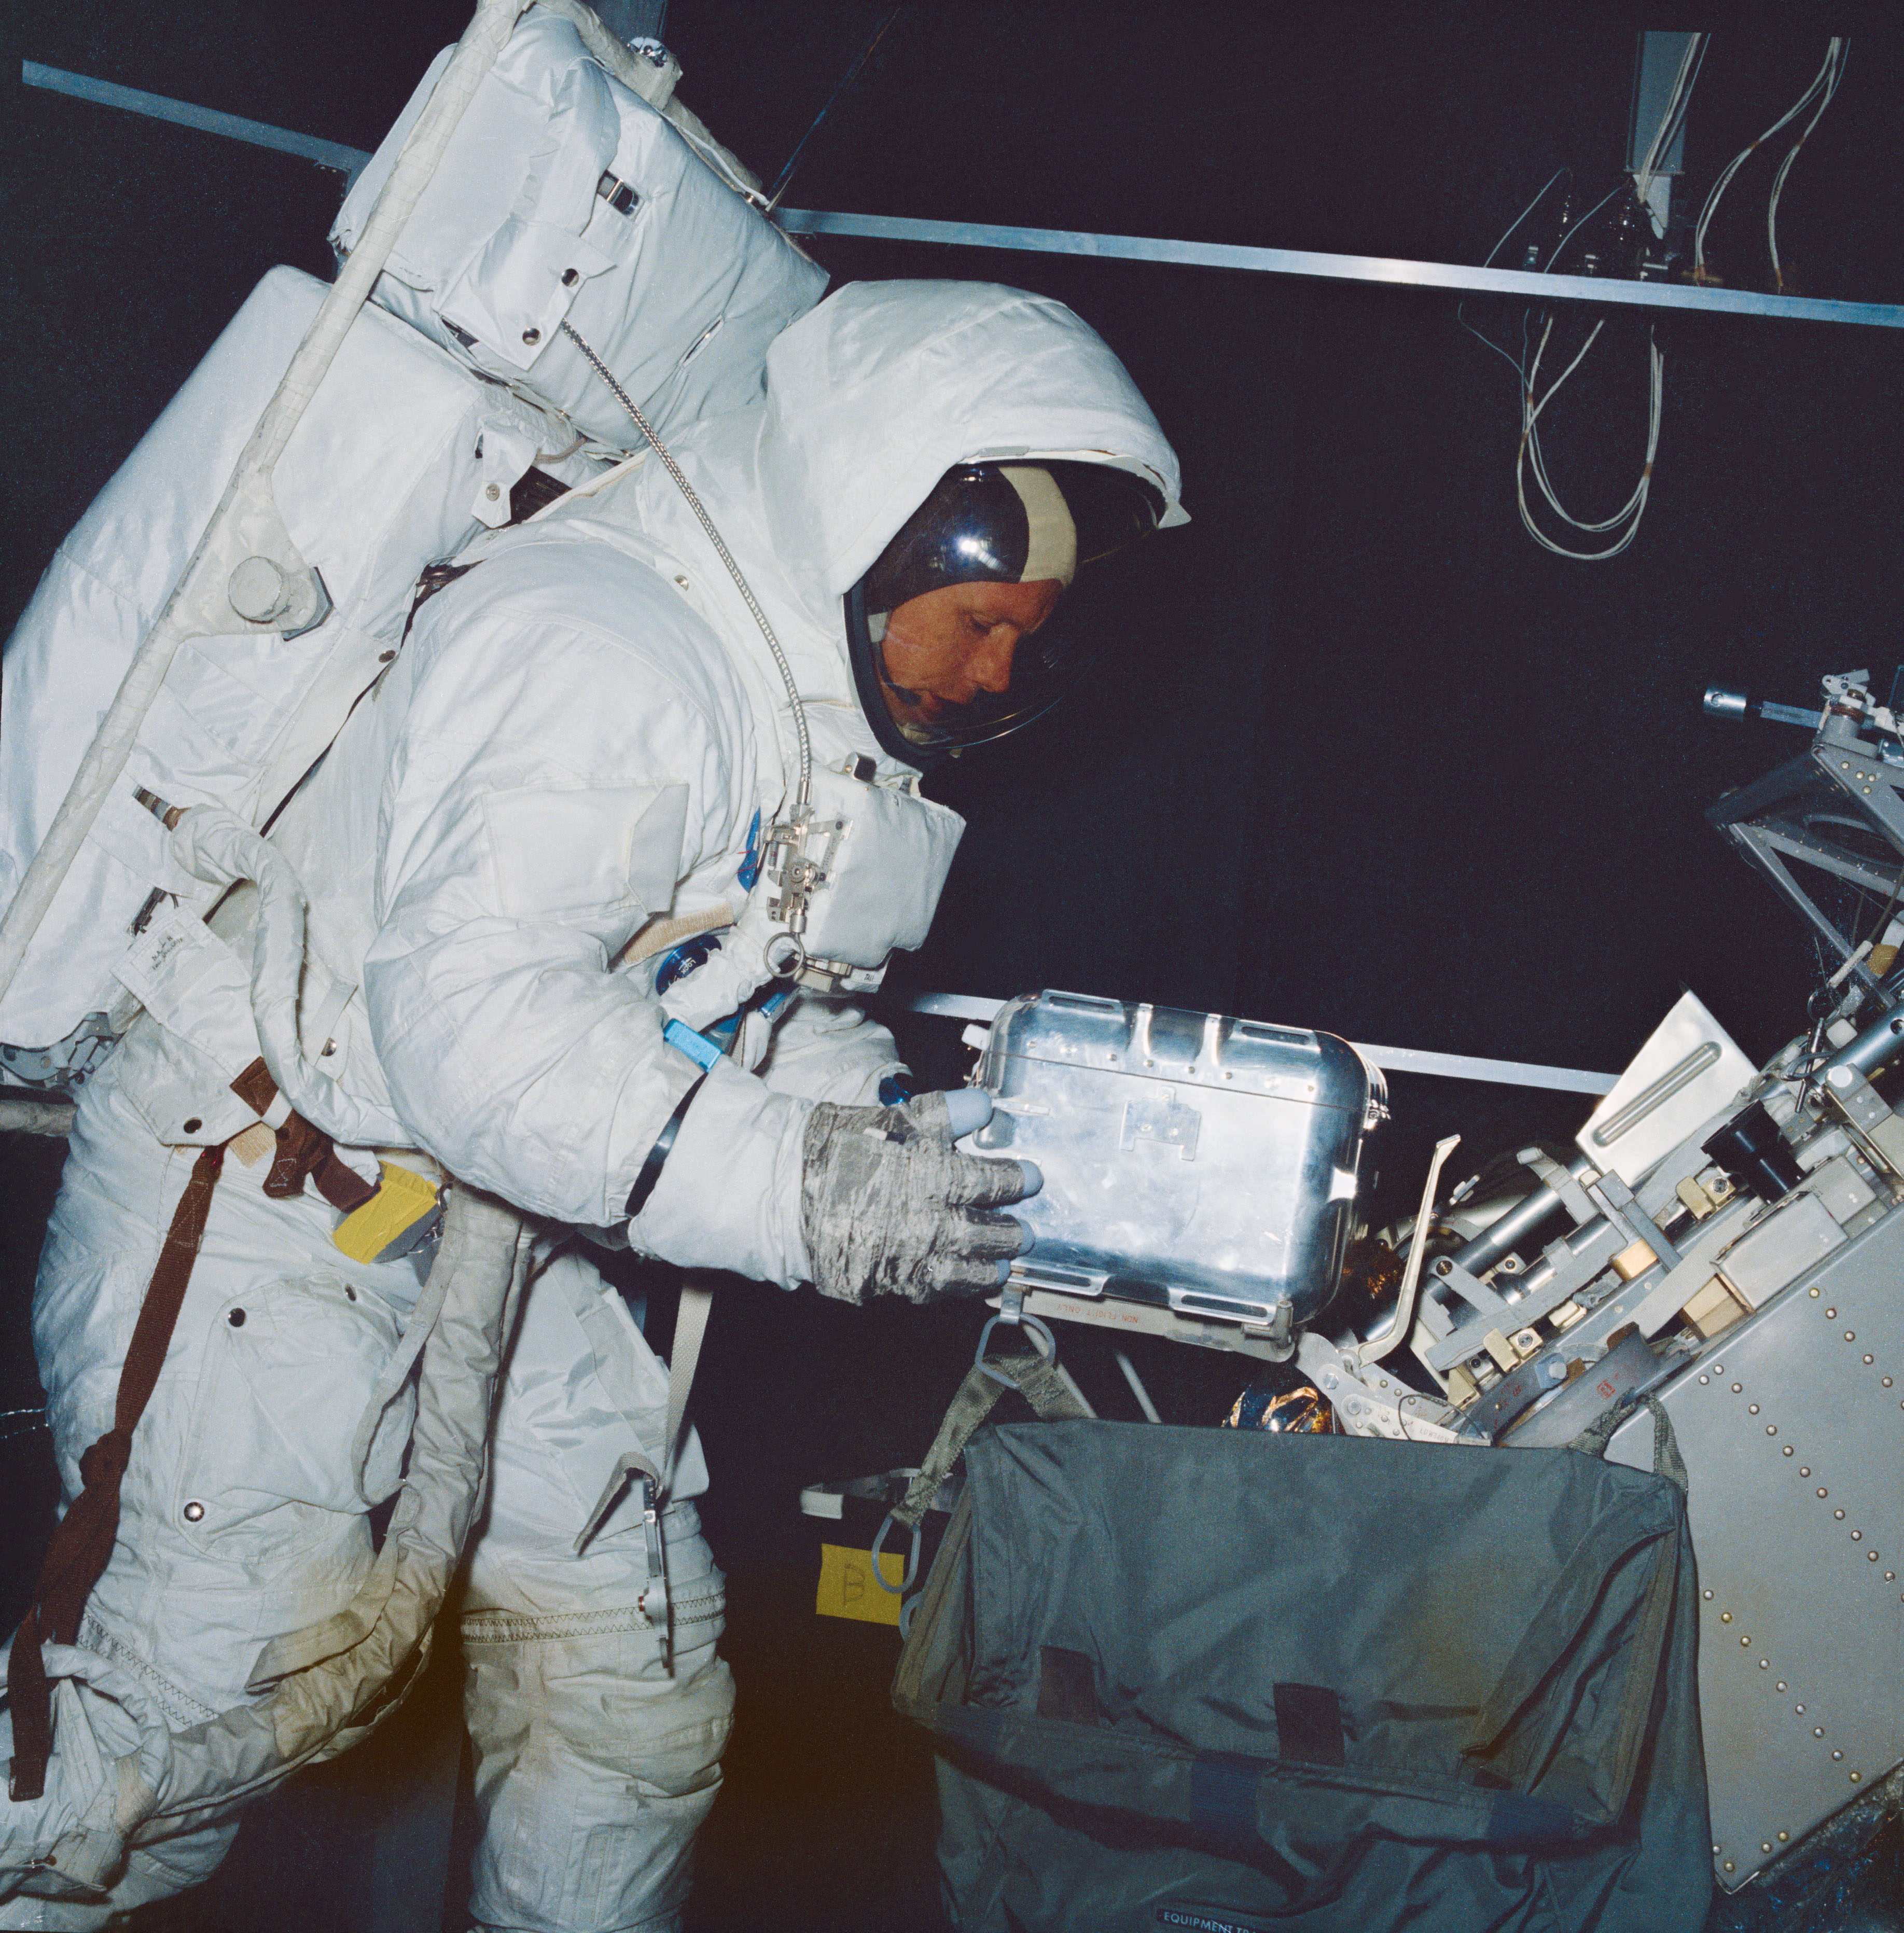 Neil A. Armstrong trains with a lunar sample container in a vacuum chamber